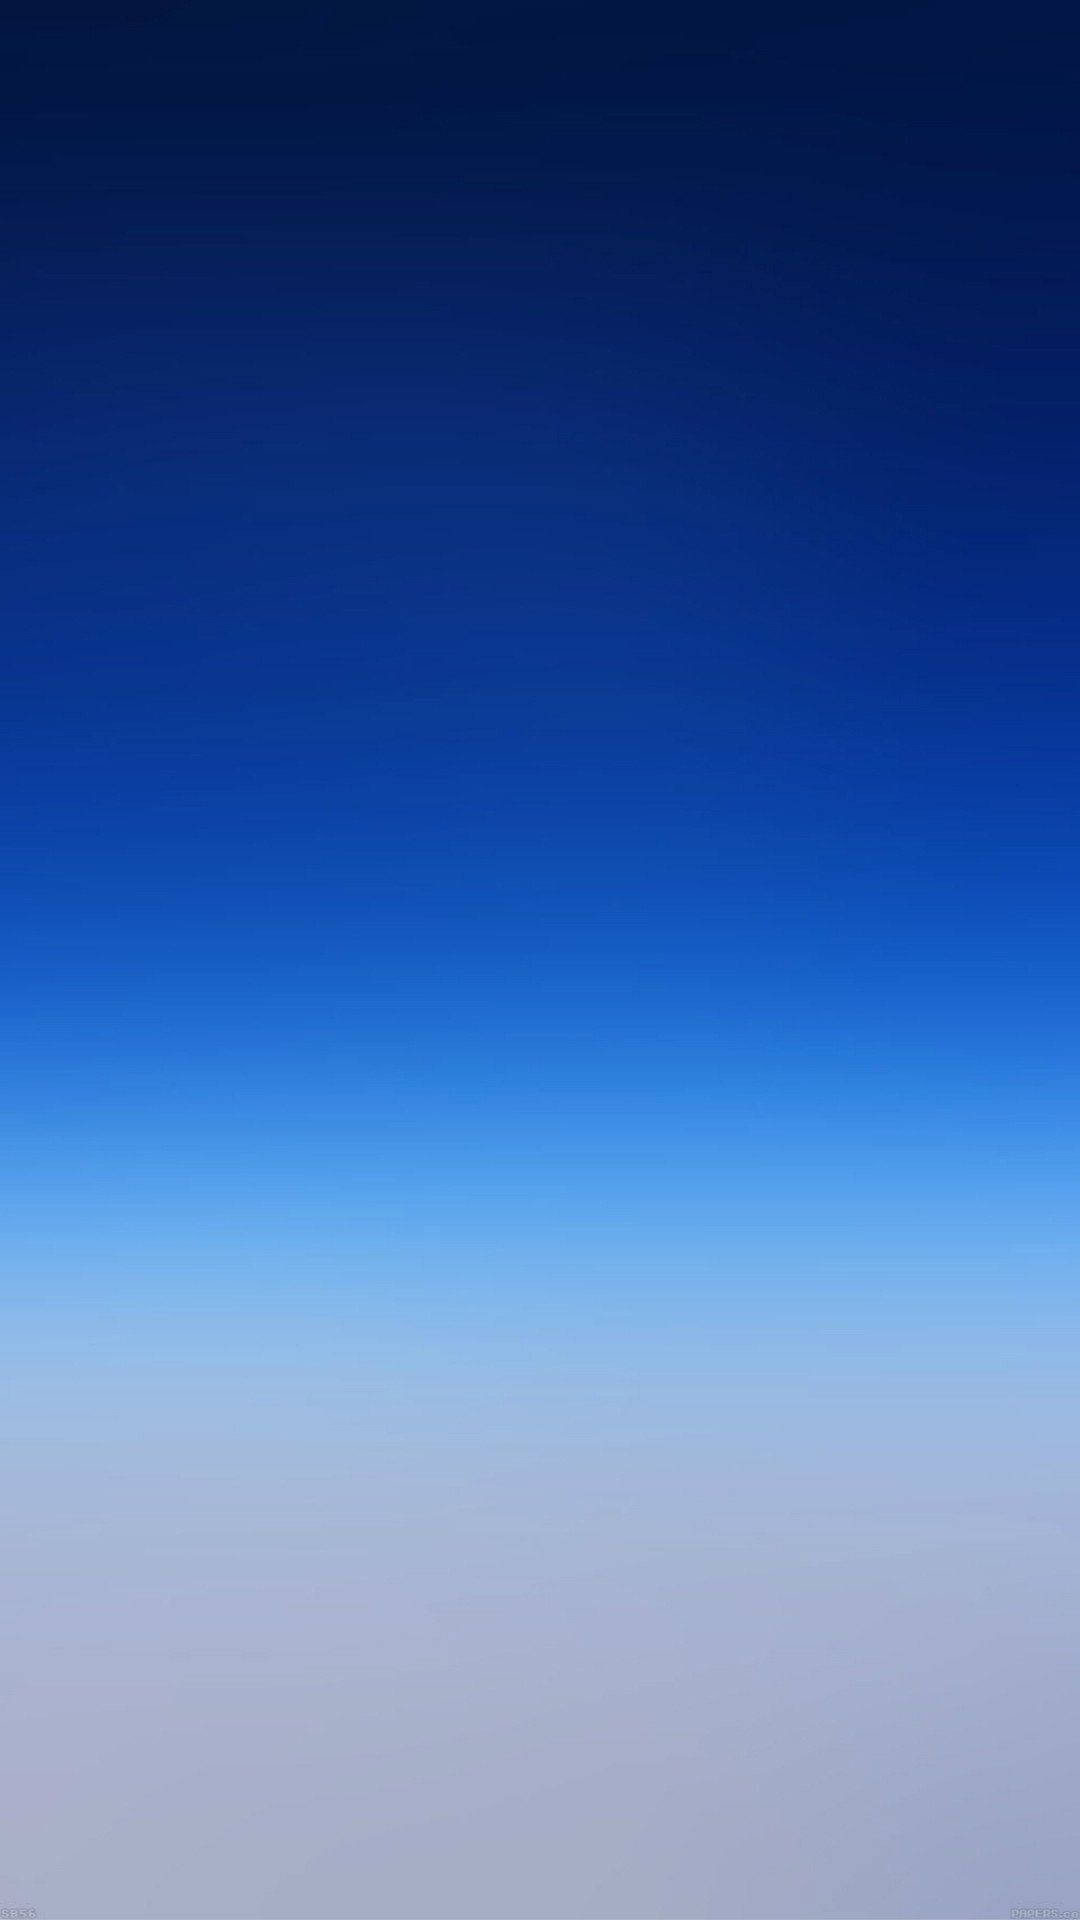 A Blue Sky With Clouds And A Plane Flying Over It Wallpaper